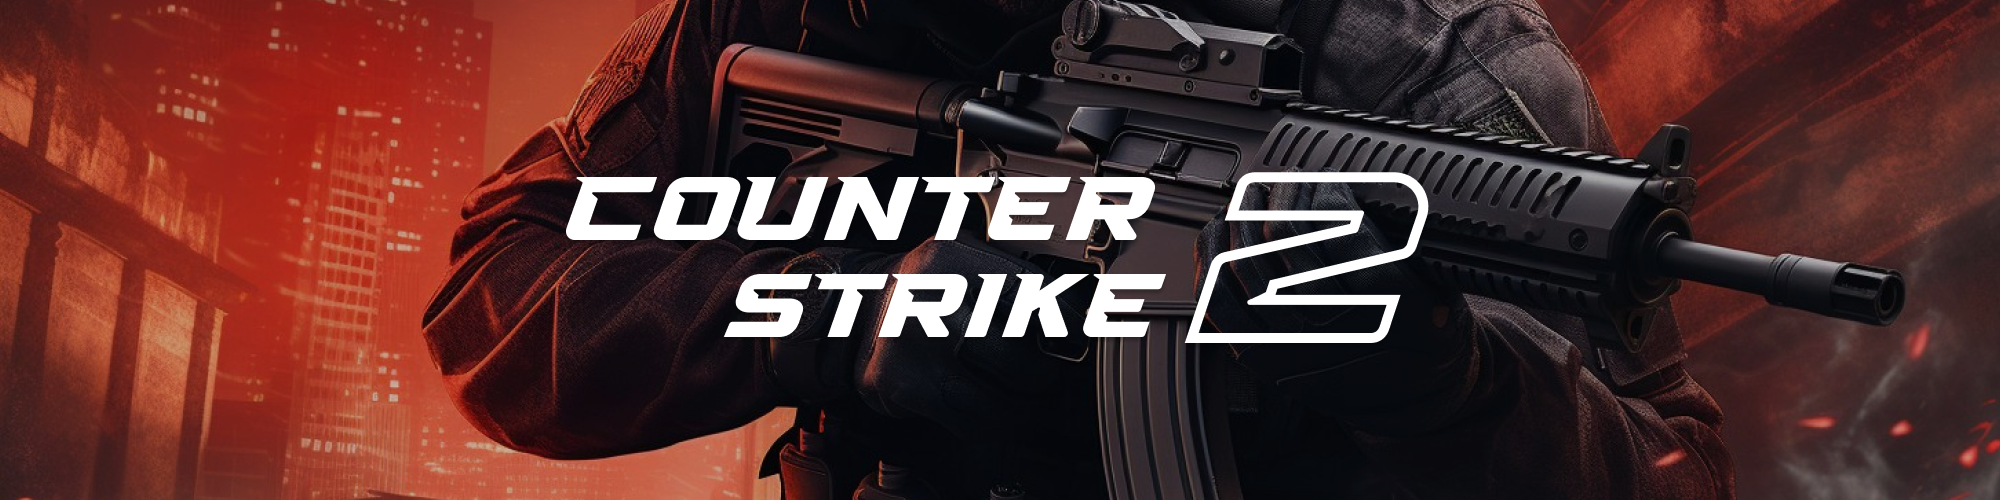 Counter Strike 2 Download on PC  How to Play Counter Strike 2 (CS2 Download)  